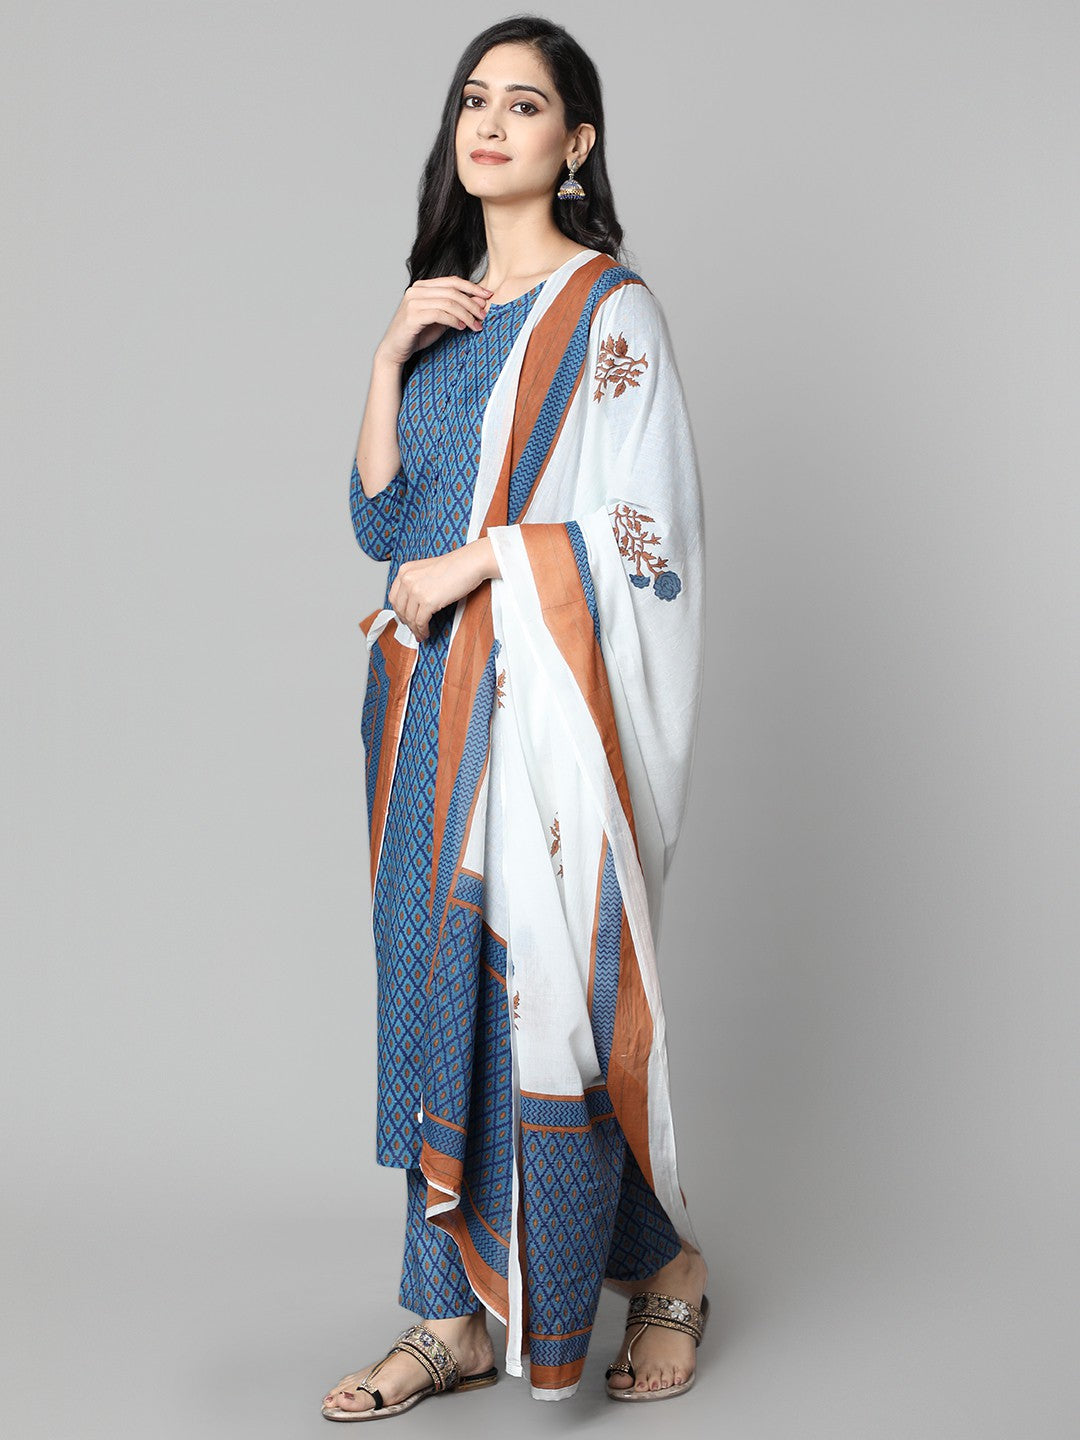 Women's Blue Printed Rayon Kurti Collection - Final Clearance Sale